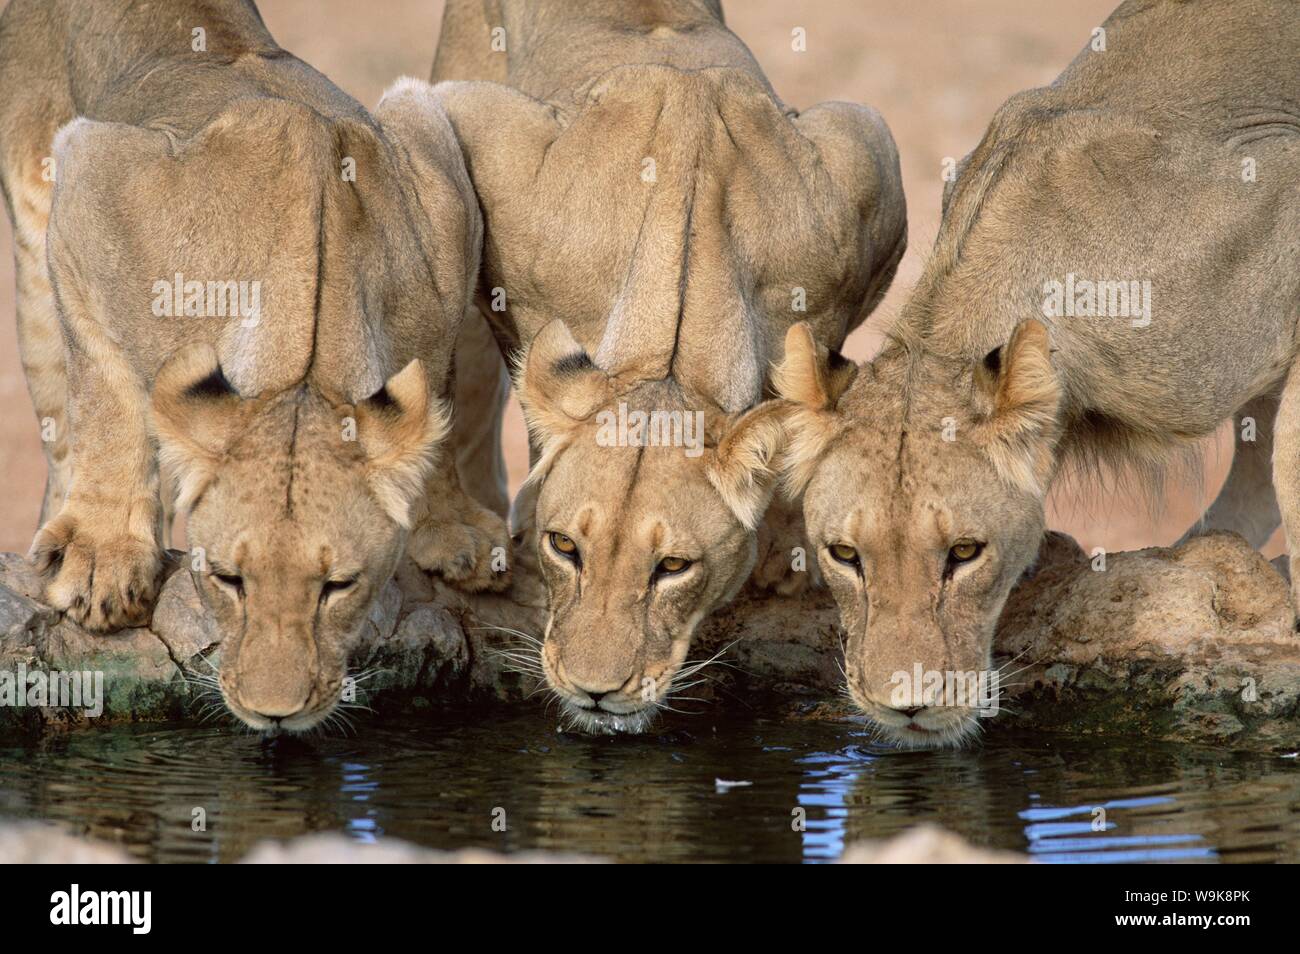 Lions drinking, Panthera leo, Kgalagadi Transfrontier Park, South Africa, Africa Stock Photo